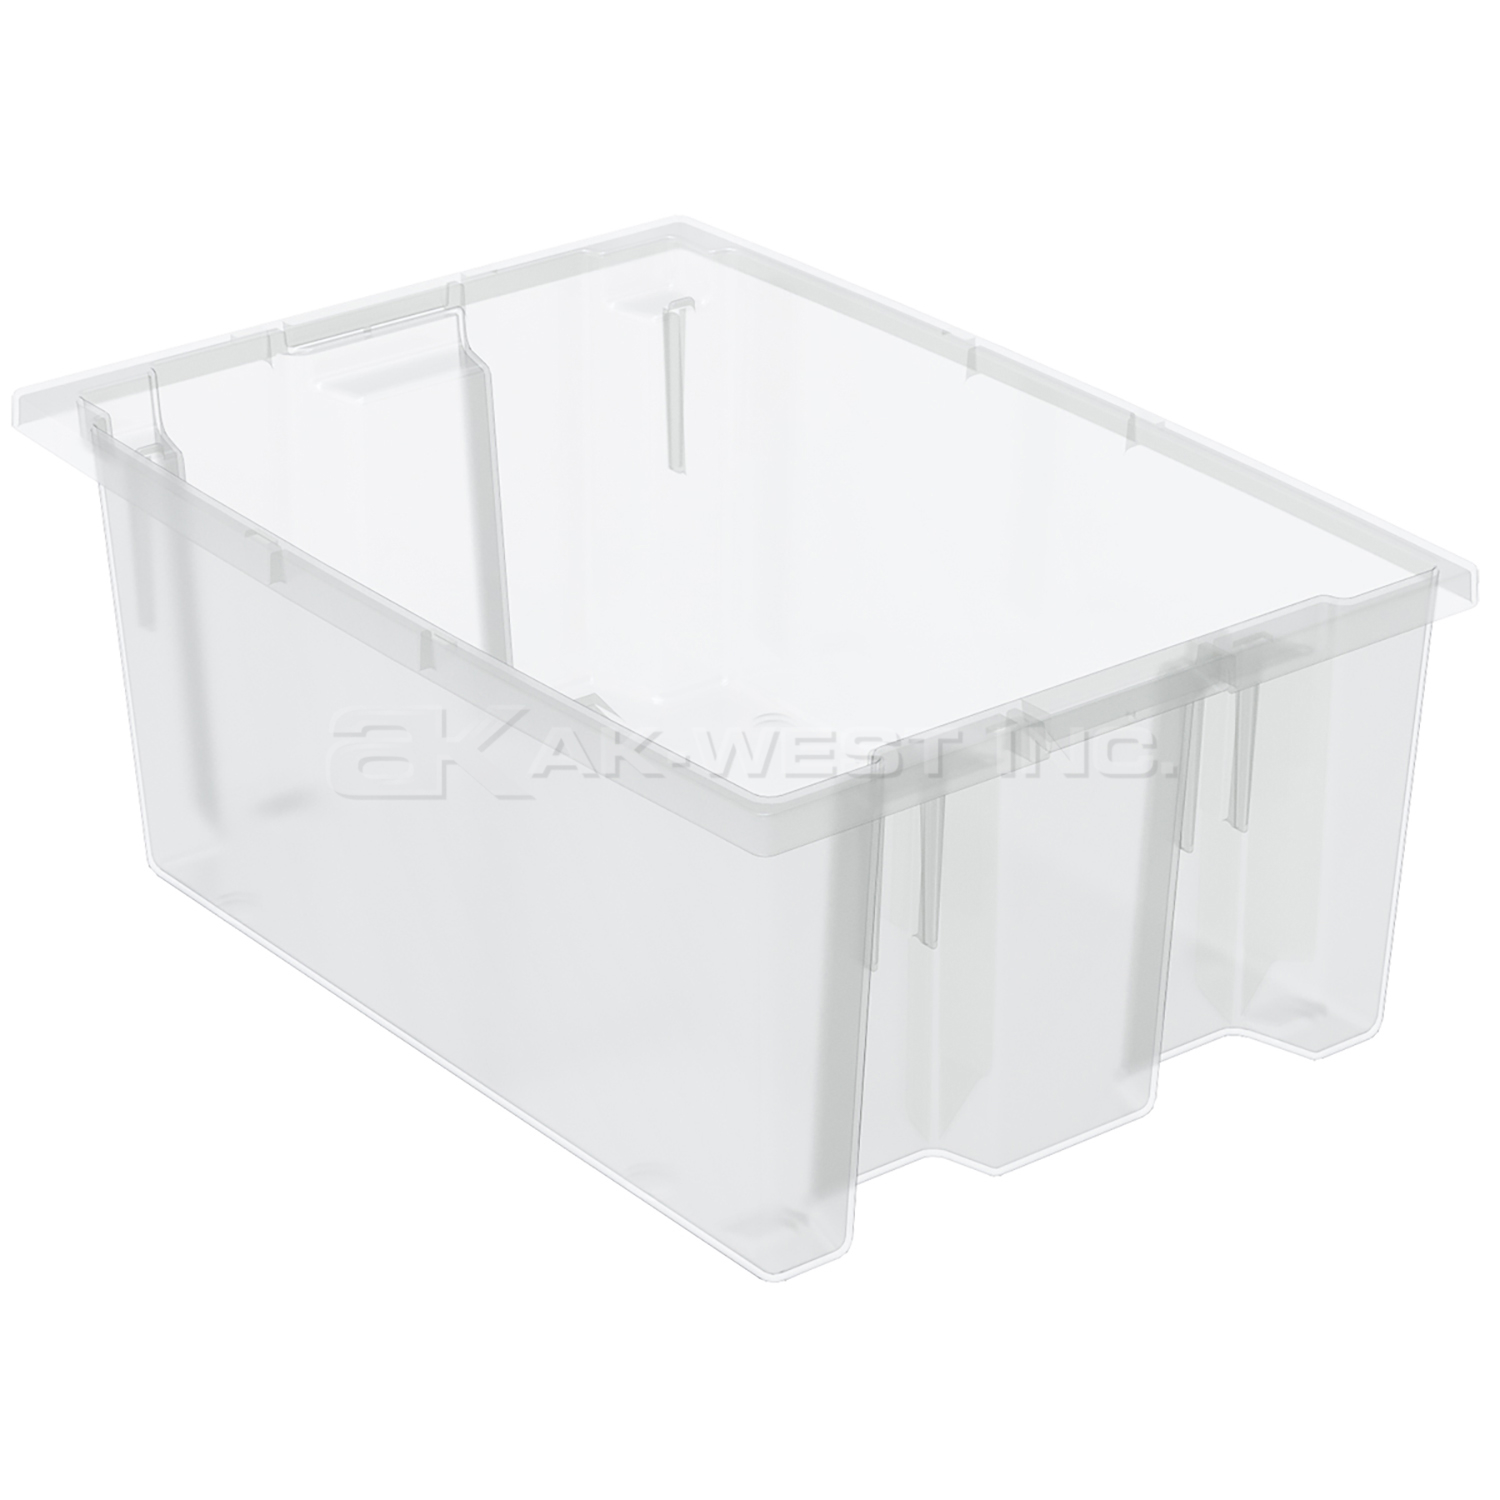 Clear, 19-1/2" x 13-1/2" x 8" Nest and Stack Tote (6 Per Carton)